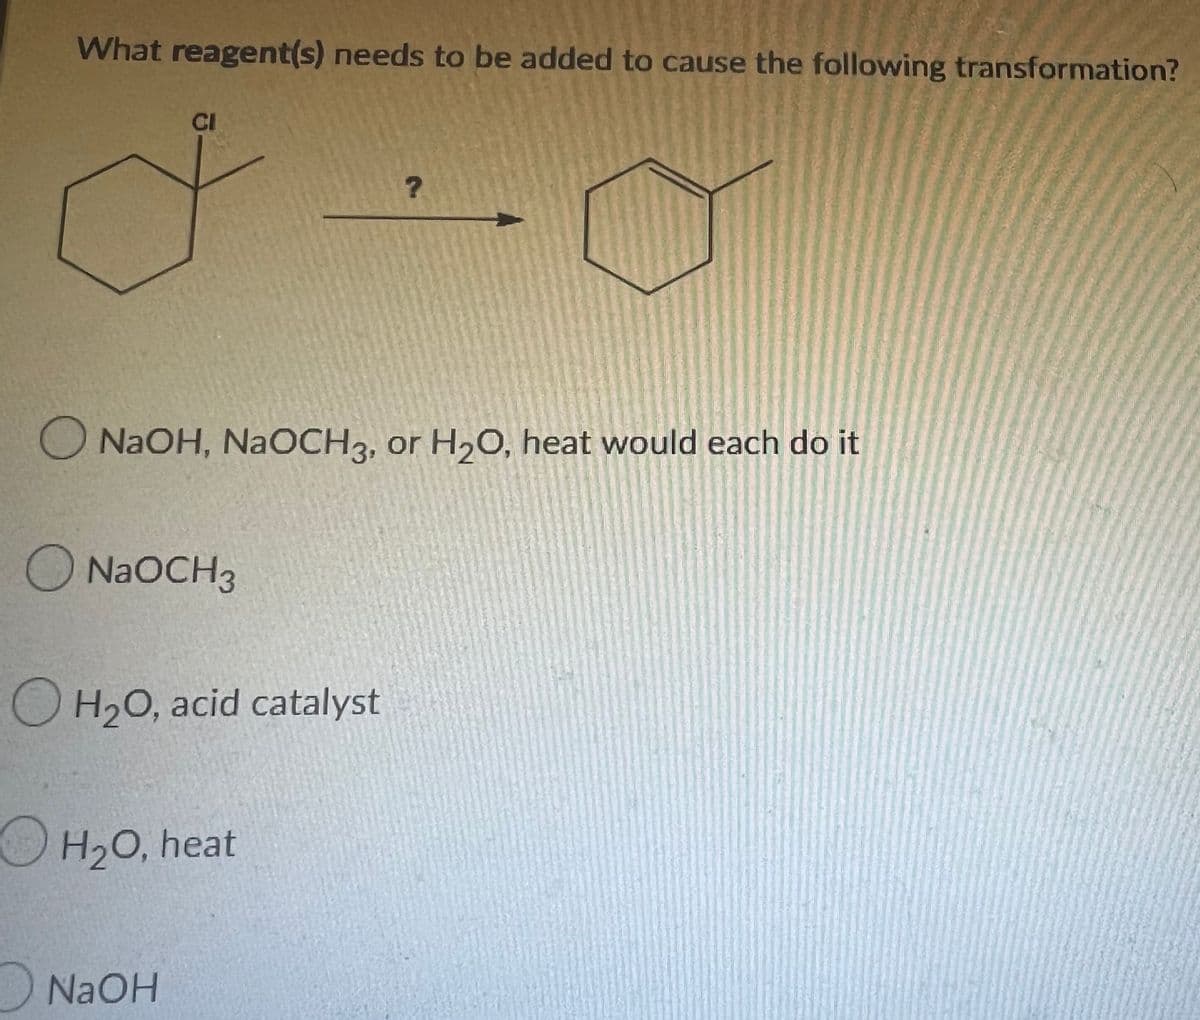 What reagent(s) needs to be added to cause the following transformation?
CI
o
?
O NaOH, NaOCH3, or H₂O, heat would each do it
NaOCH 3
OH₂O, acid catalyst
OH₂O, heat
NaOH